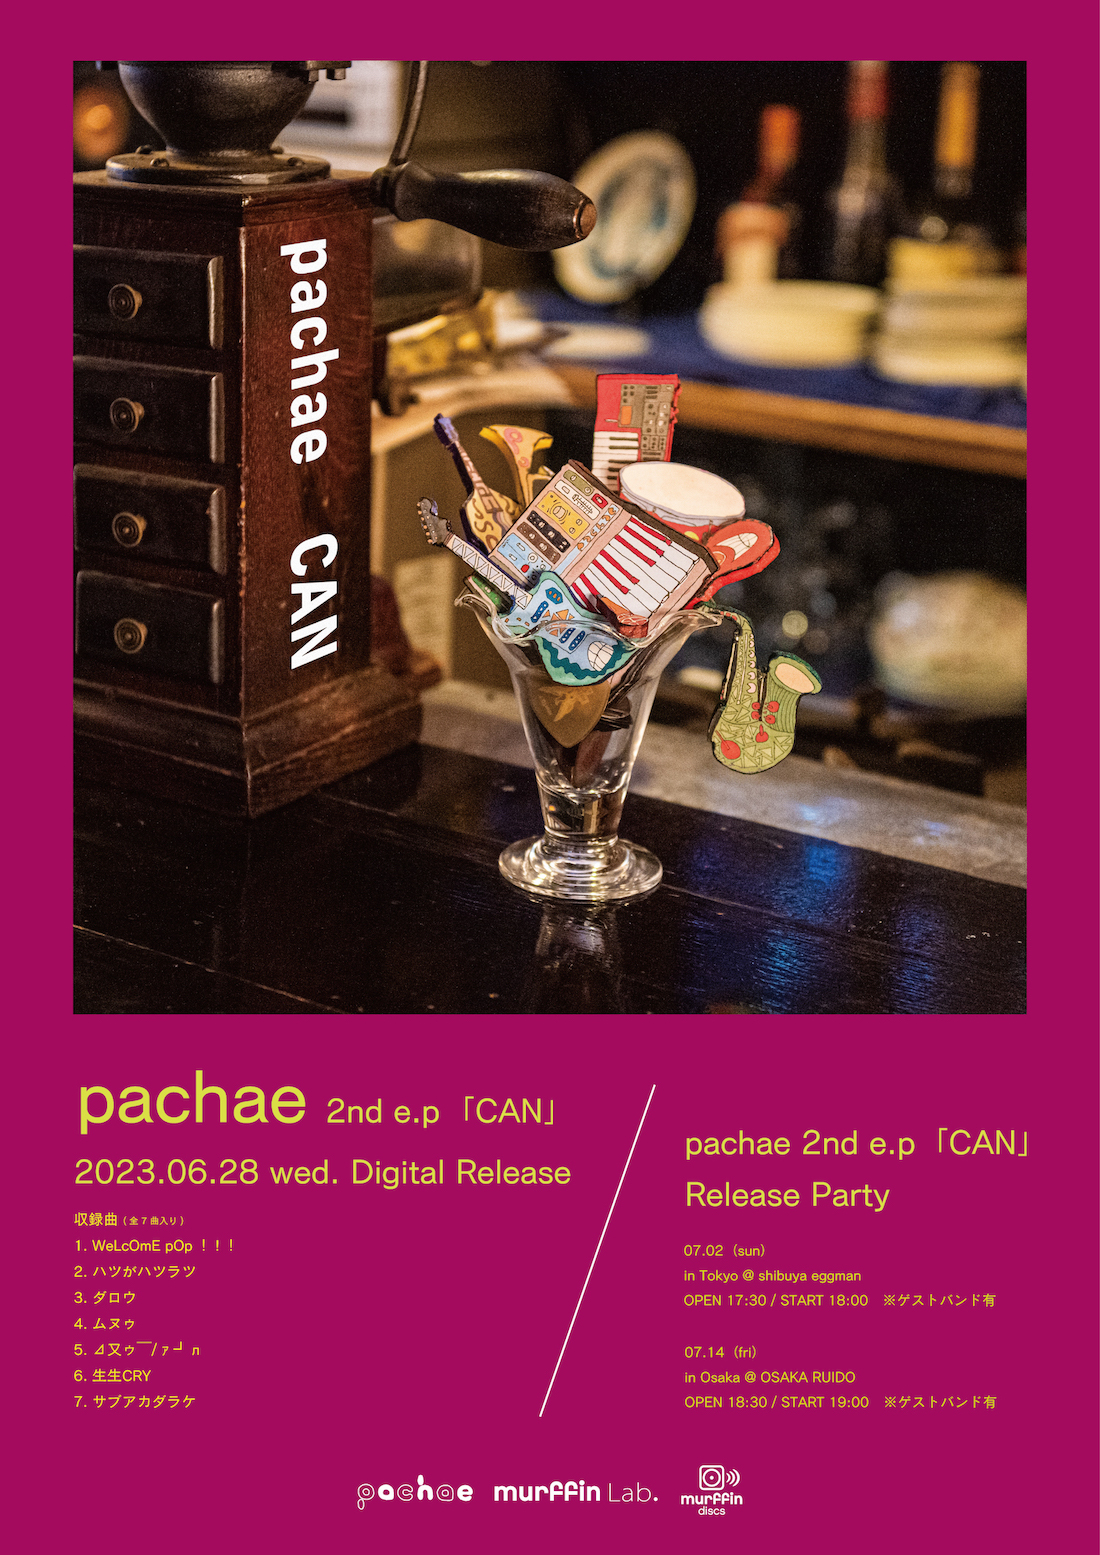 pachae 2nd e.p「CAN」Release Party in Tokyo